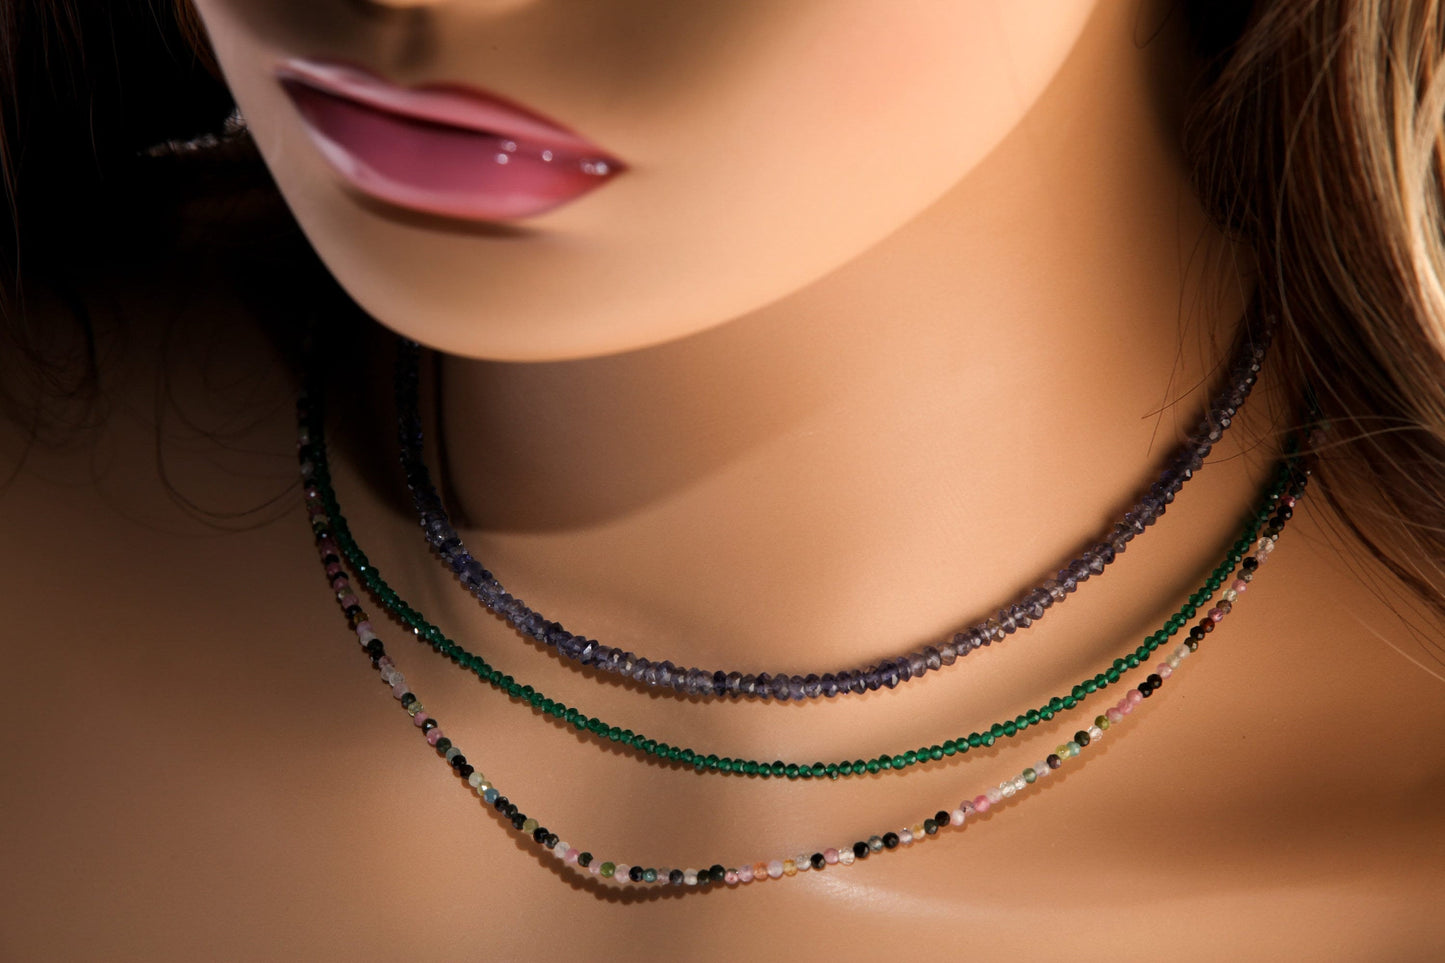 3-3.5mm Faceted Iolite, Emerald Spinel, Multi Watermelon Tourmaline Layering Choker 925 Sterling Silver Necklace, Precious Gemstones